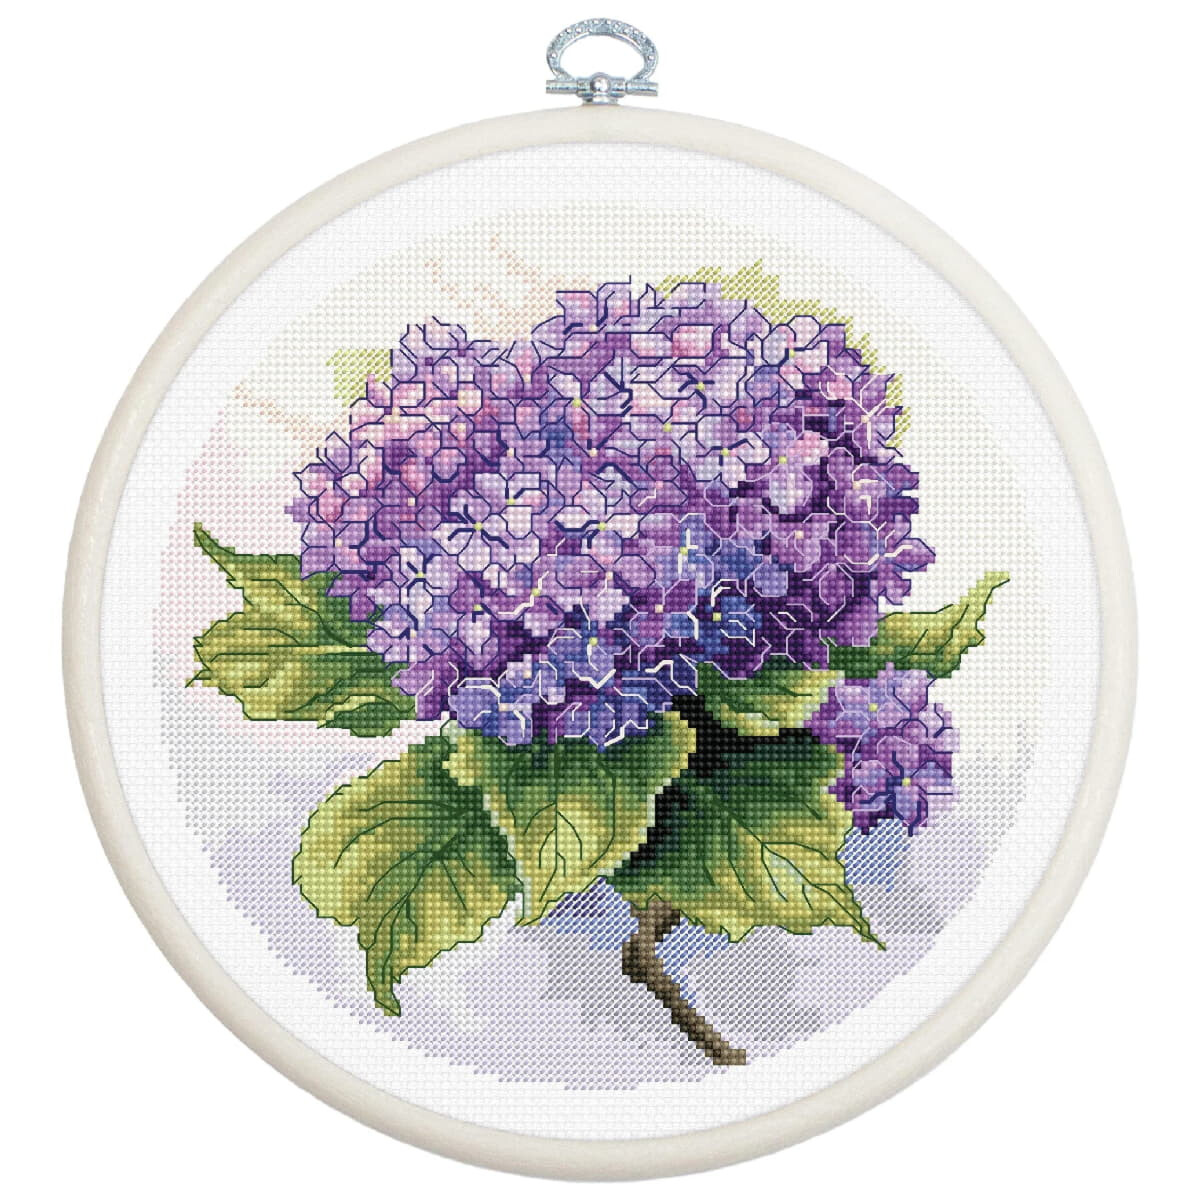 Luca-S counted cross stitch kit with hoop...